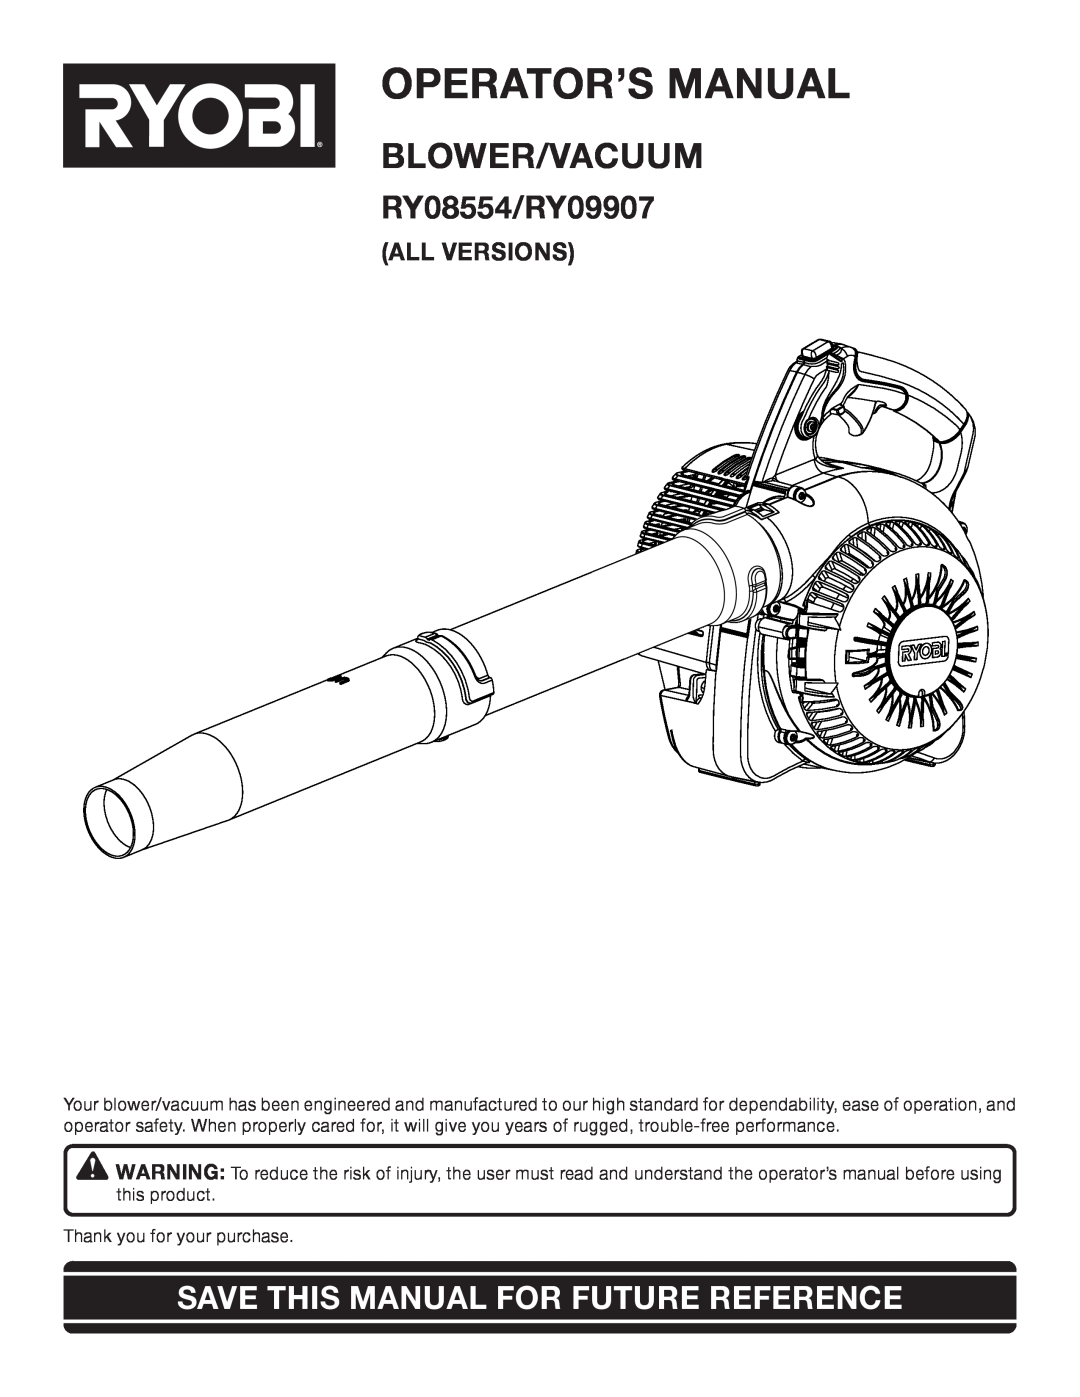 Ryobi manual Operator’S Manual, Blower/Vacuum, RY08554/RY09907, Save This Manual For Future Reference, All Versions 